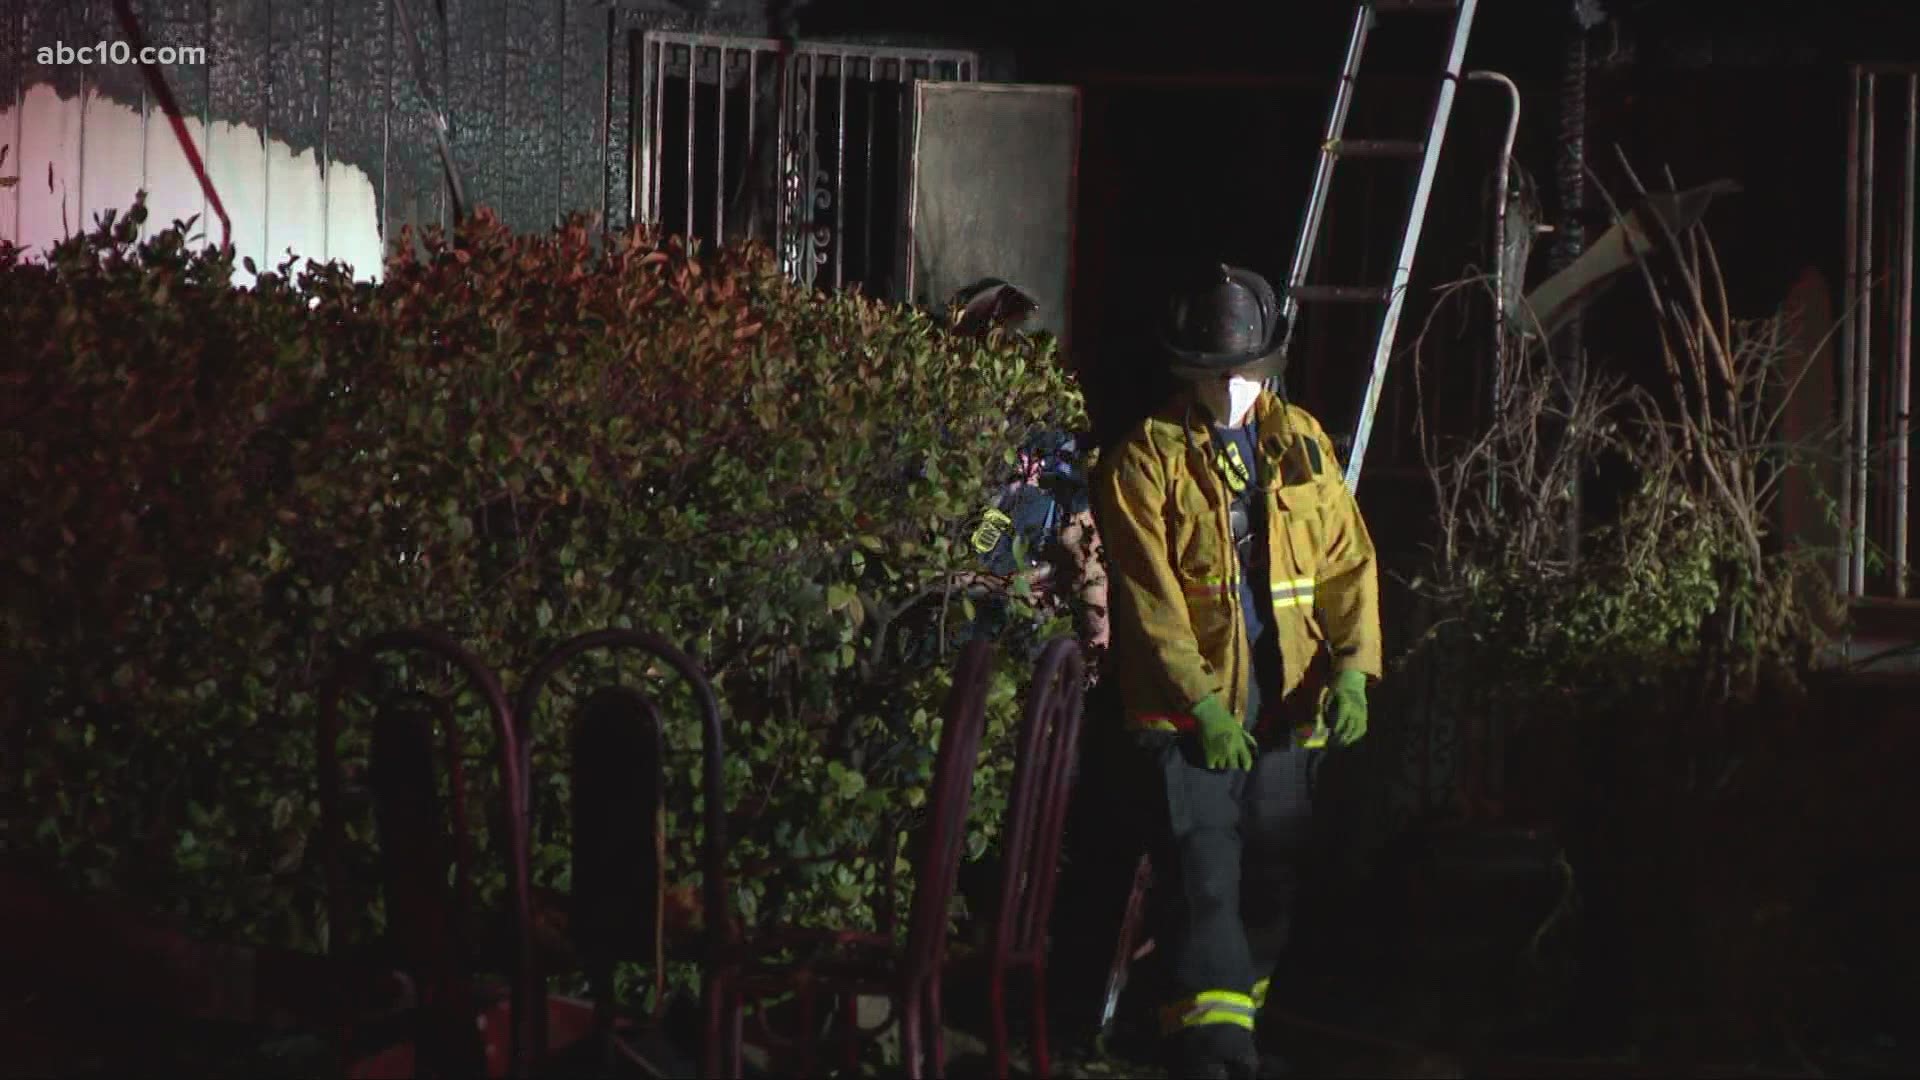 An elderly couple was inside the home at the time of the fire. The man was able to get out before directing firefighters to where the woman was located.